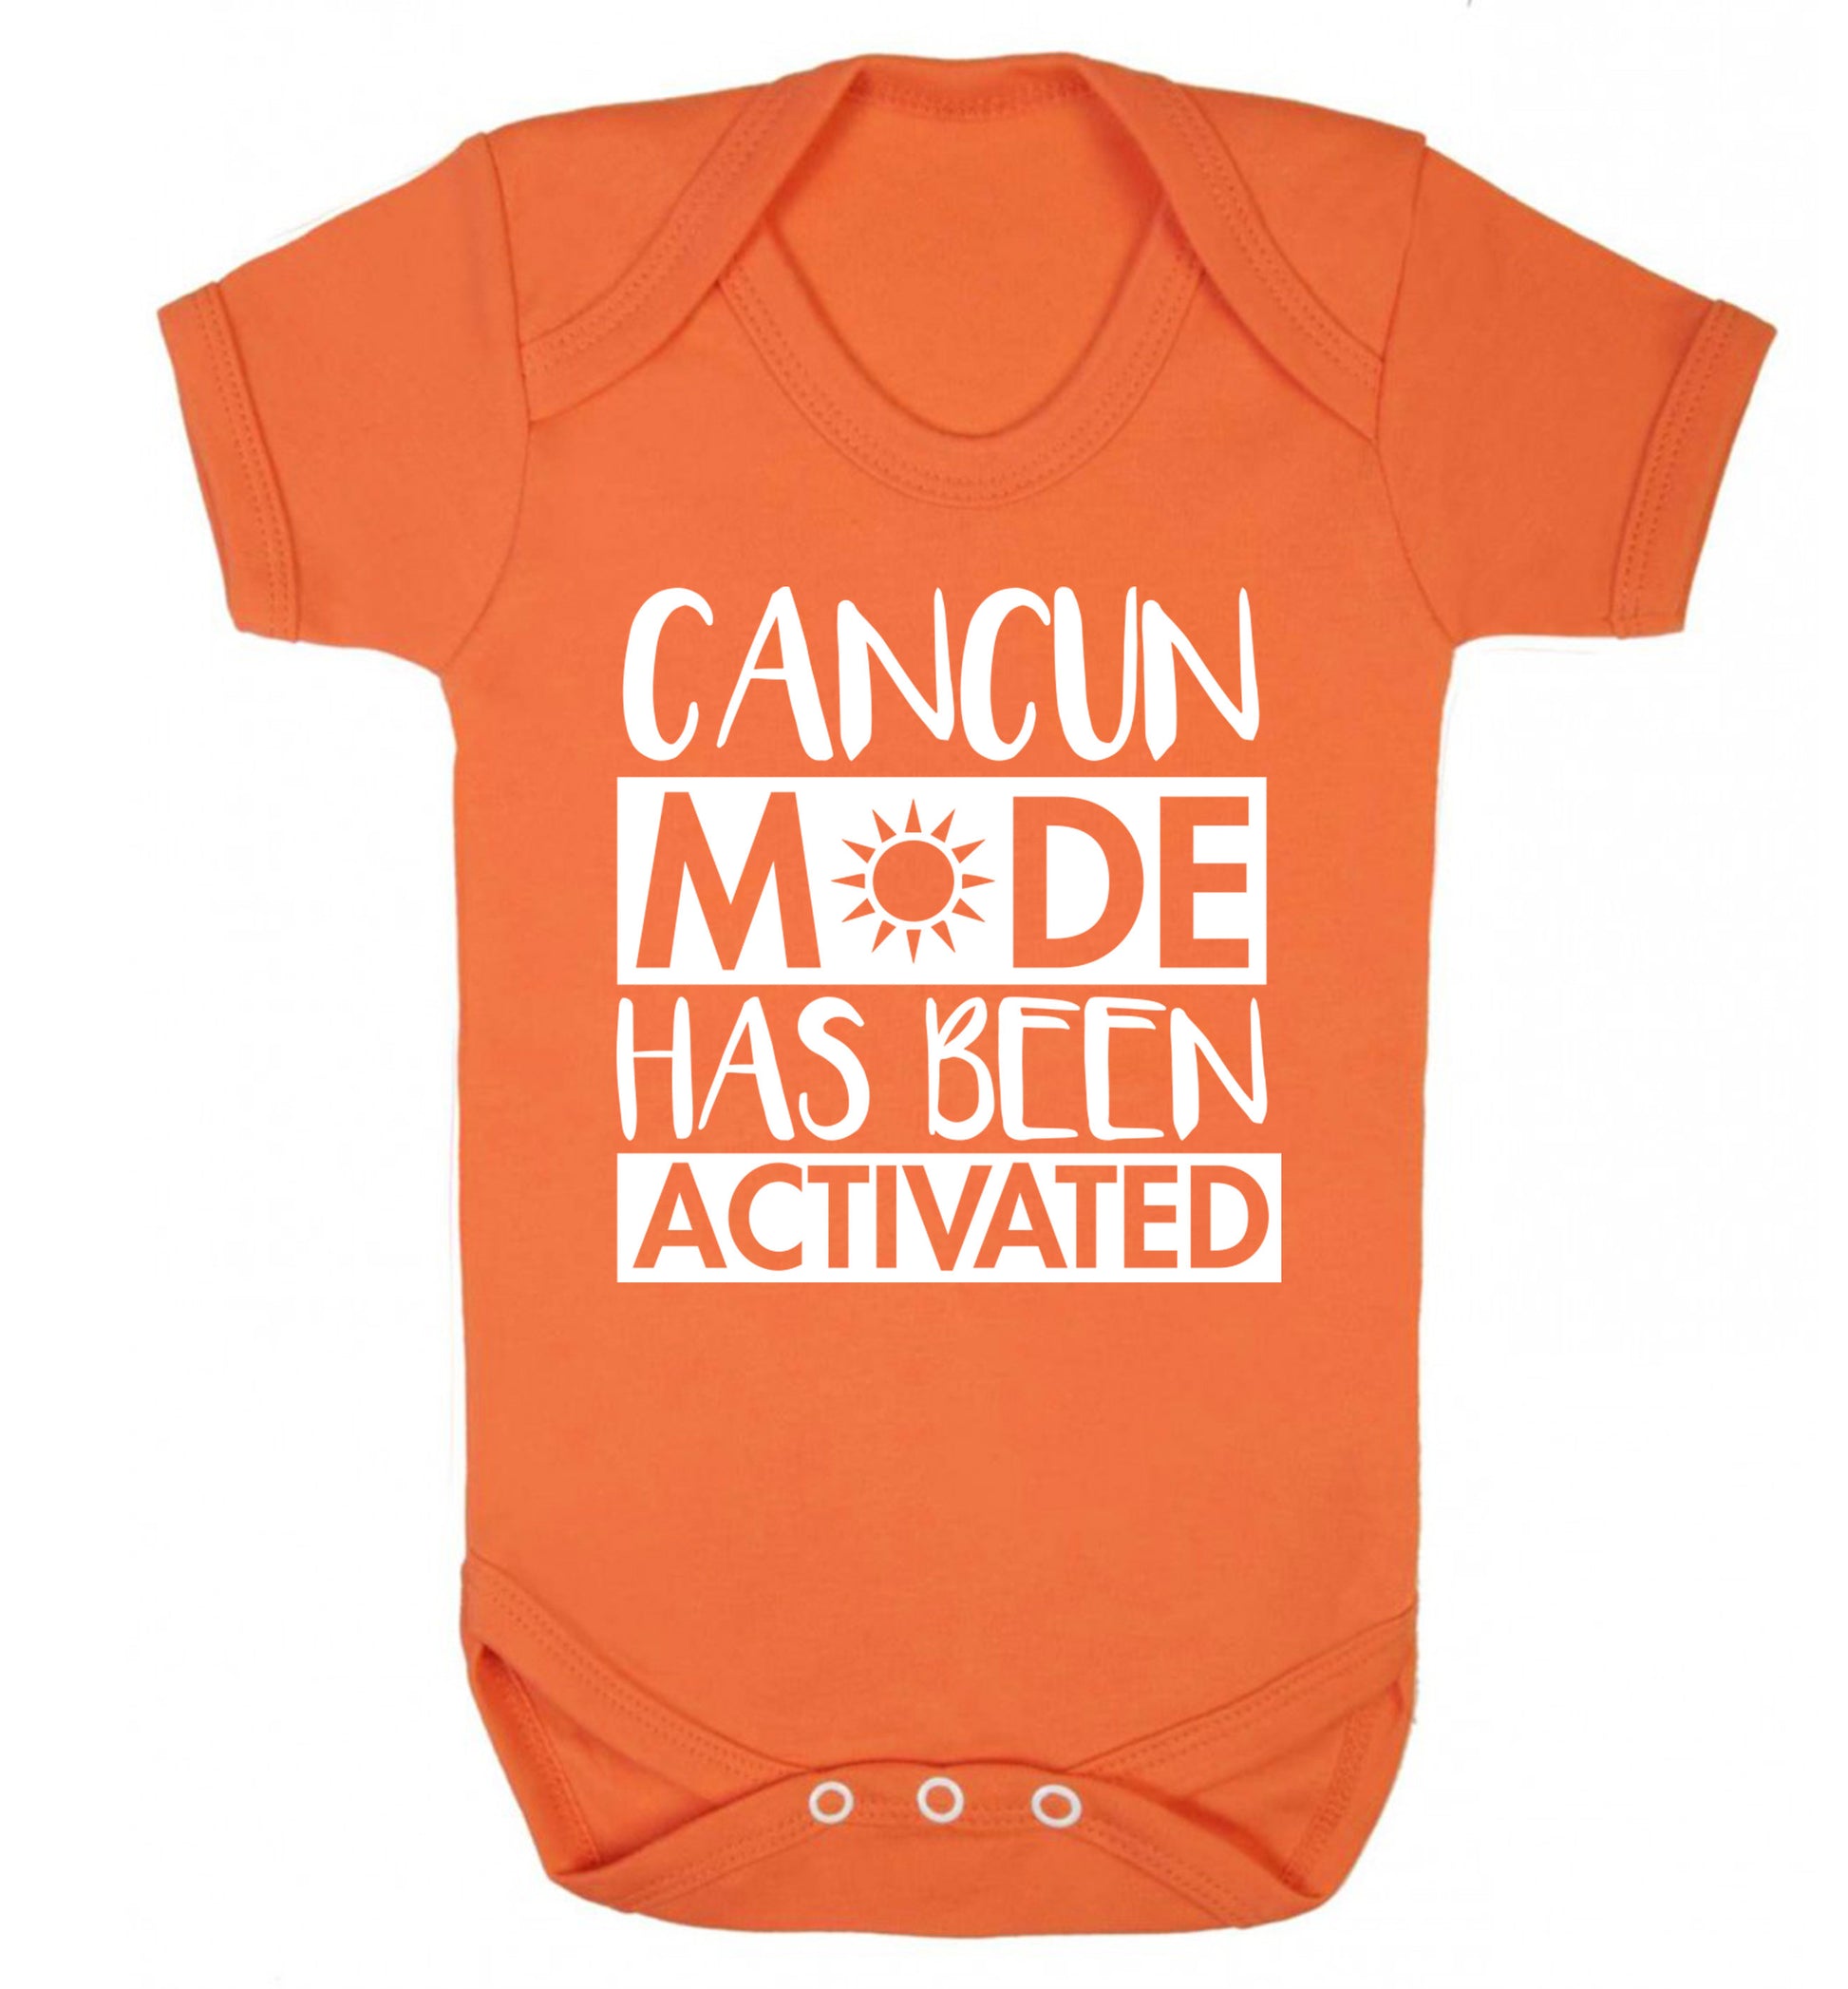 Cancun mode has been activated Baby Vest orange 18-24 months